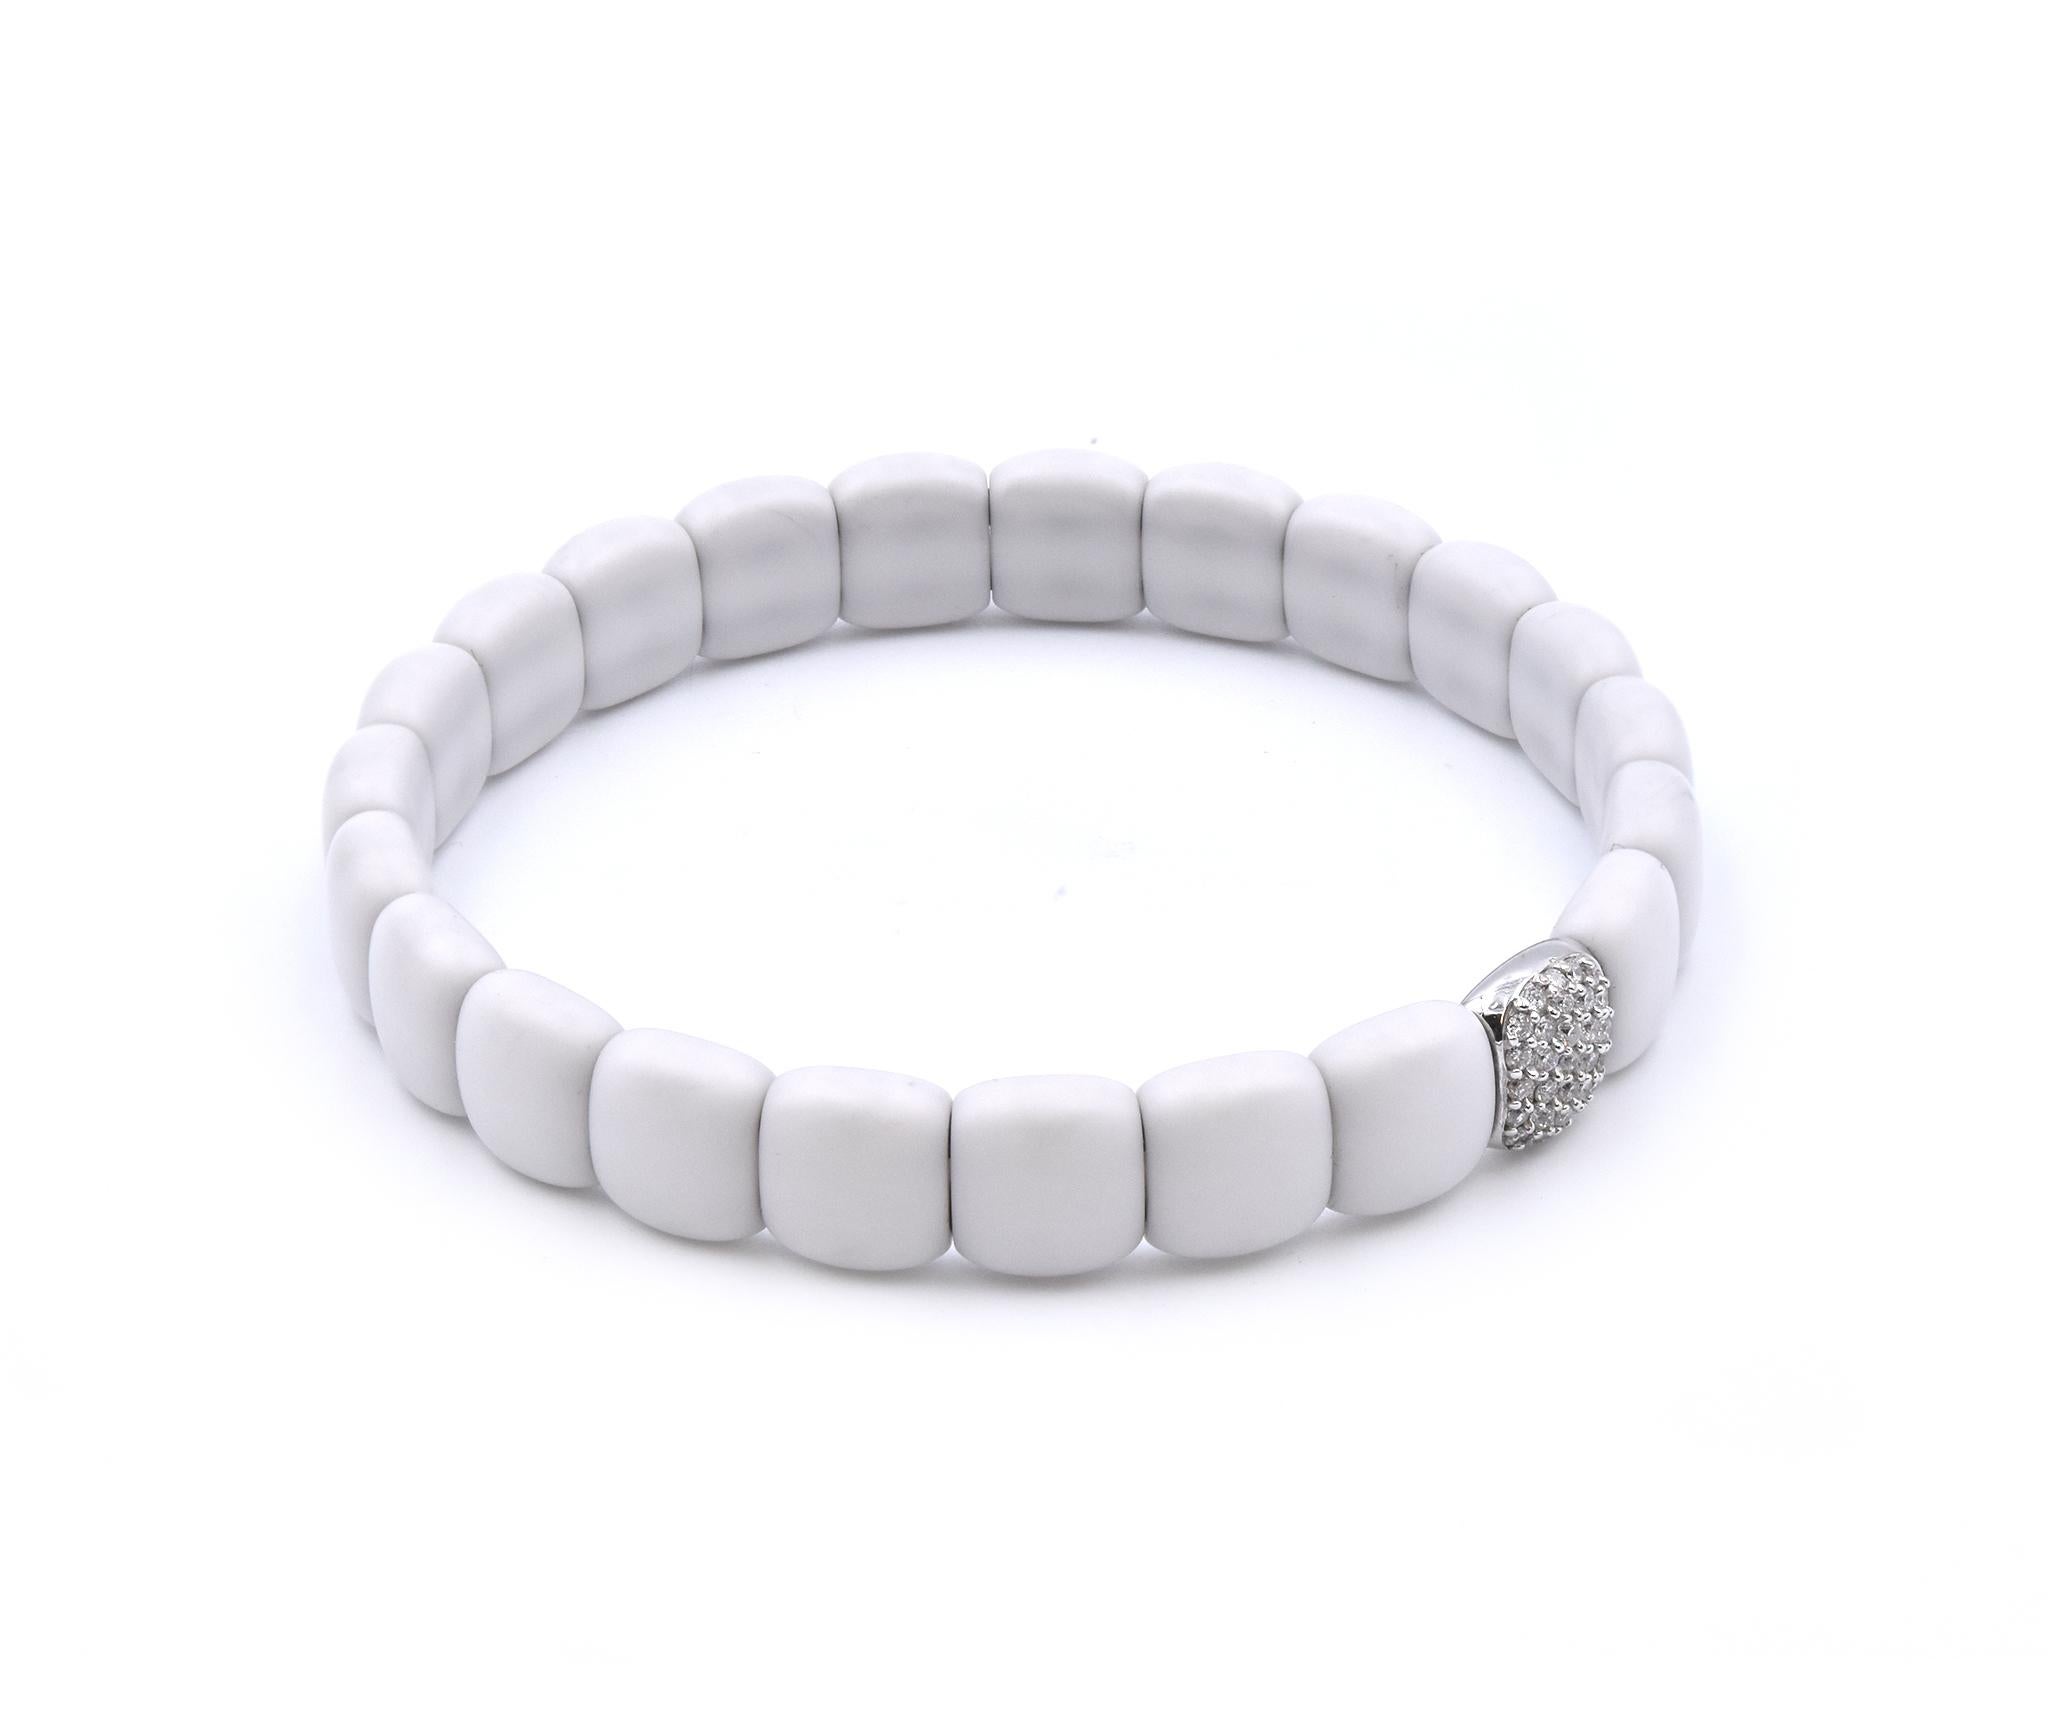 Designer: custom
Material: 18k white gold
Diamonds: 27 round brilliant cuts= .27cttw
Color: G
Clarity: VS
Dimensions: bracelet will fit up to an 8 inch wrist 
Weight: 30.61 grams